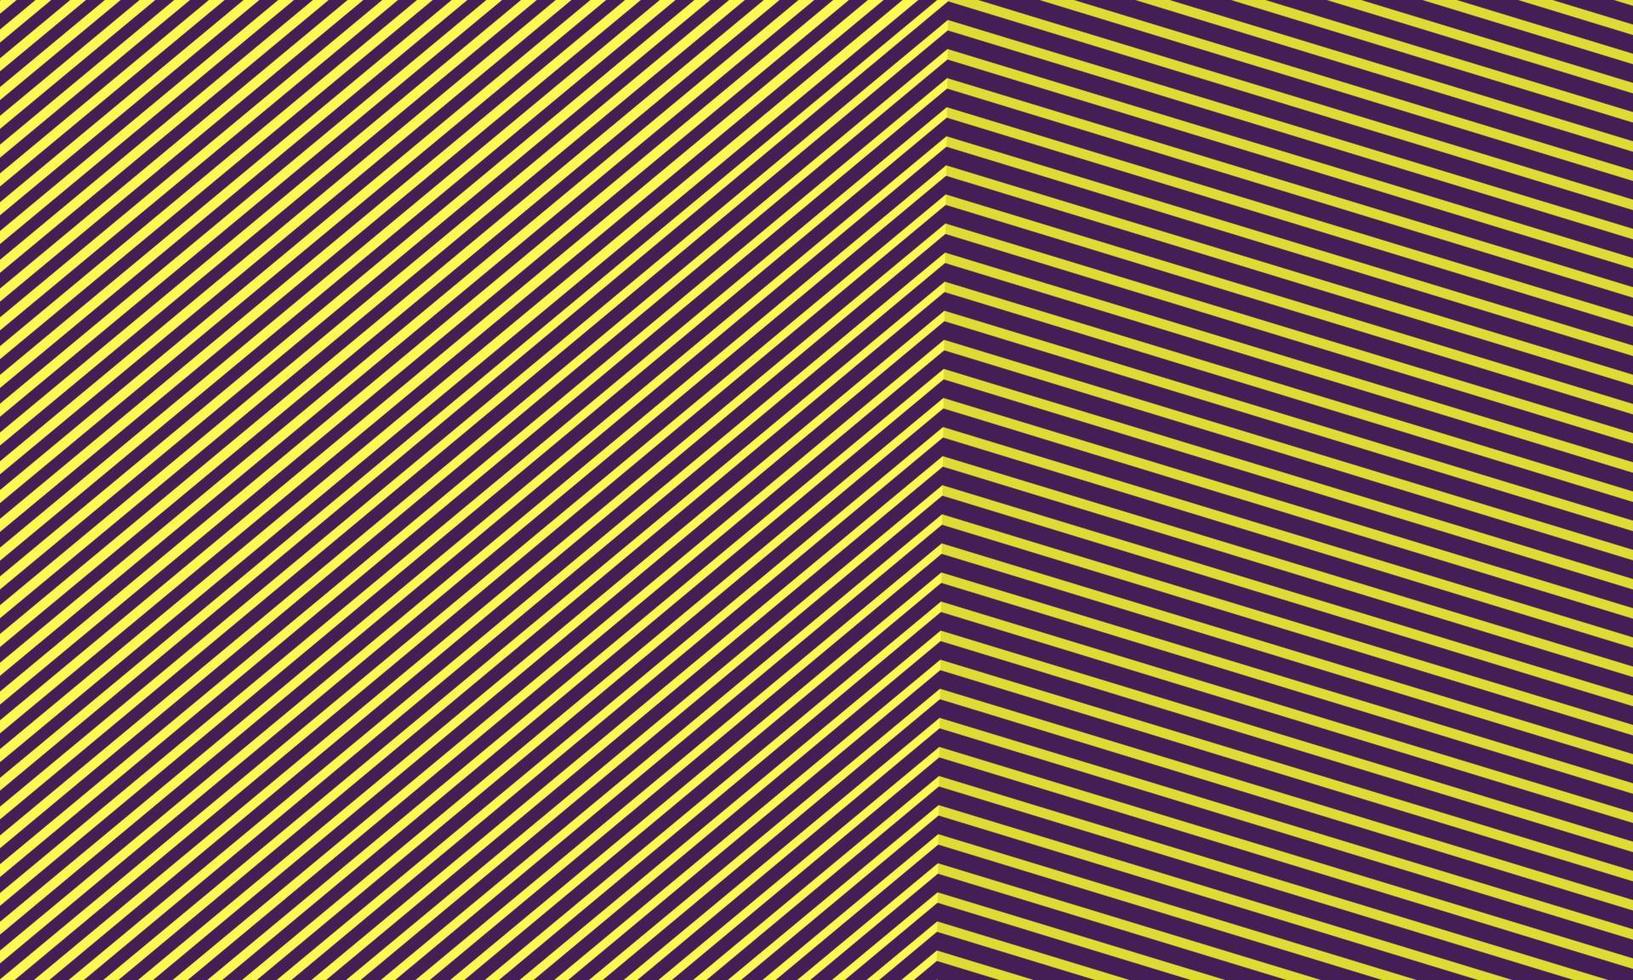 Abstract close up geometric perspective building box corner from lines shape pattern with modern yellow-purple color background, minimal vibrant trendy architecture concept. vector